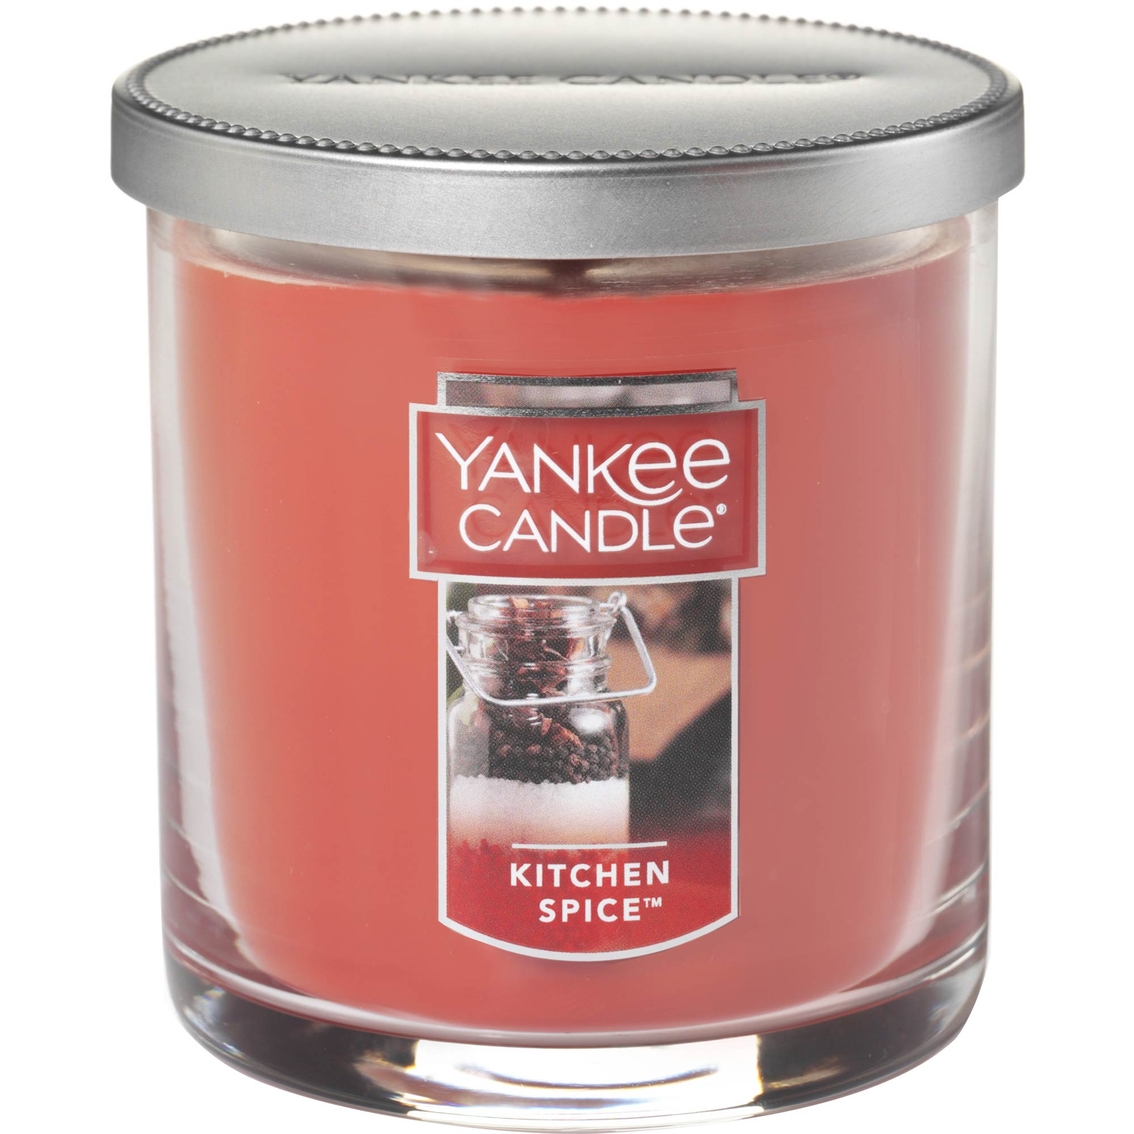 Yankee Candle Kitchen Spice Small Tumbler Candle | Candles & Home ...